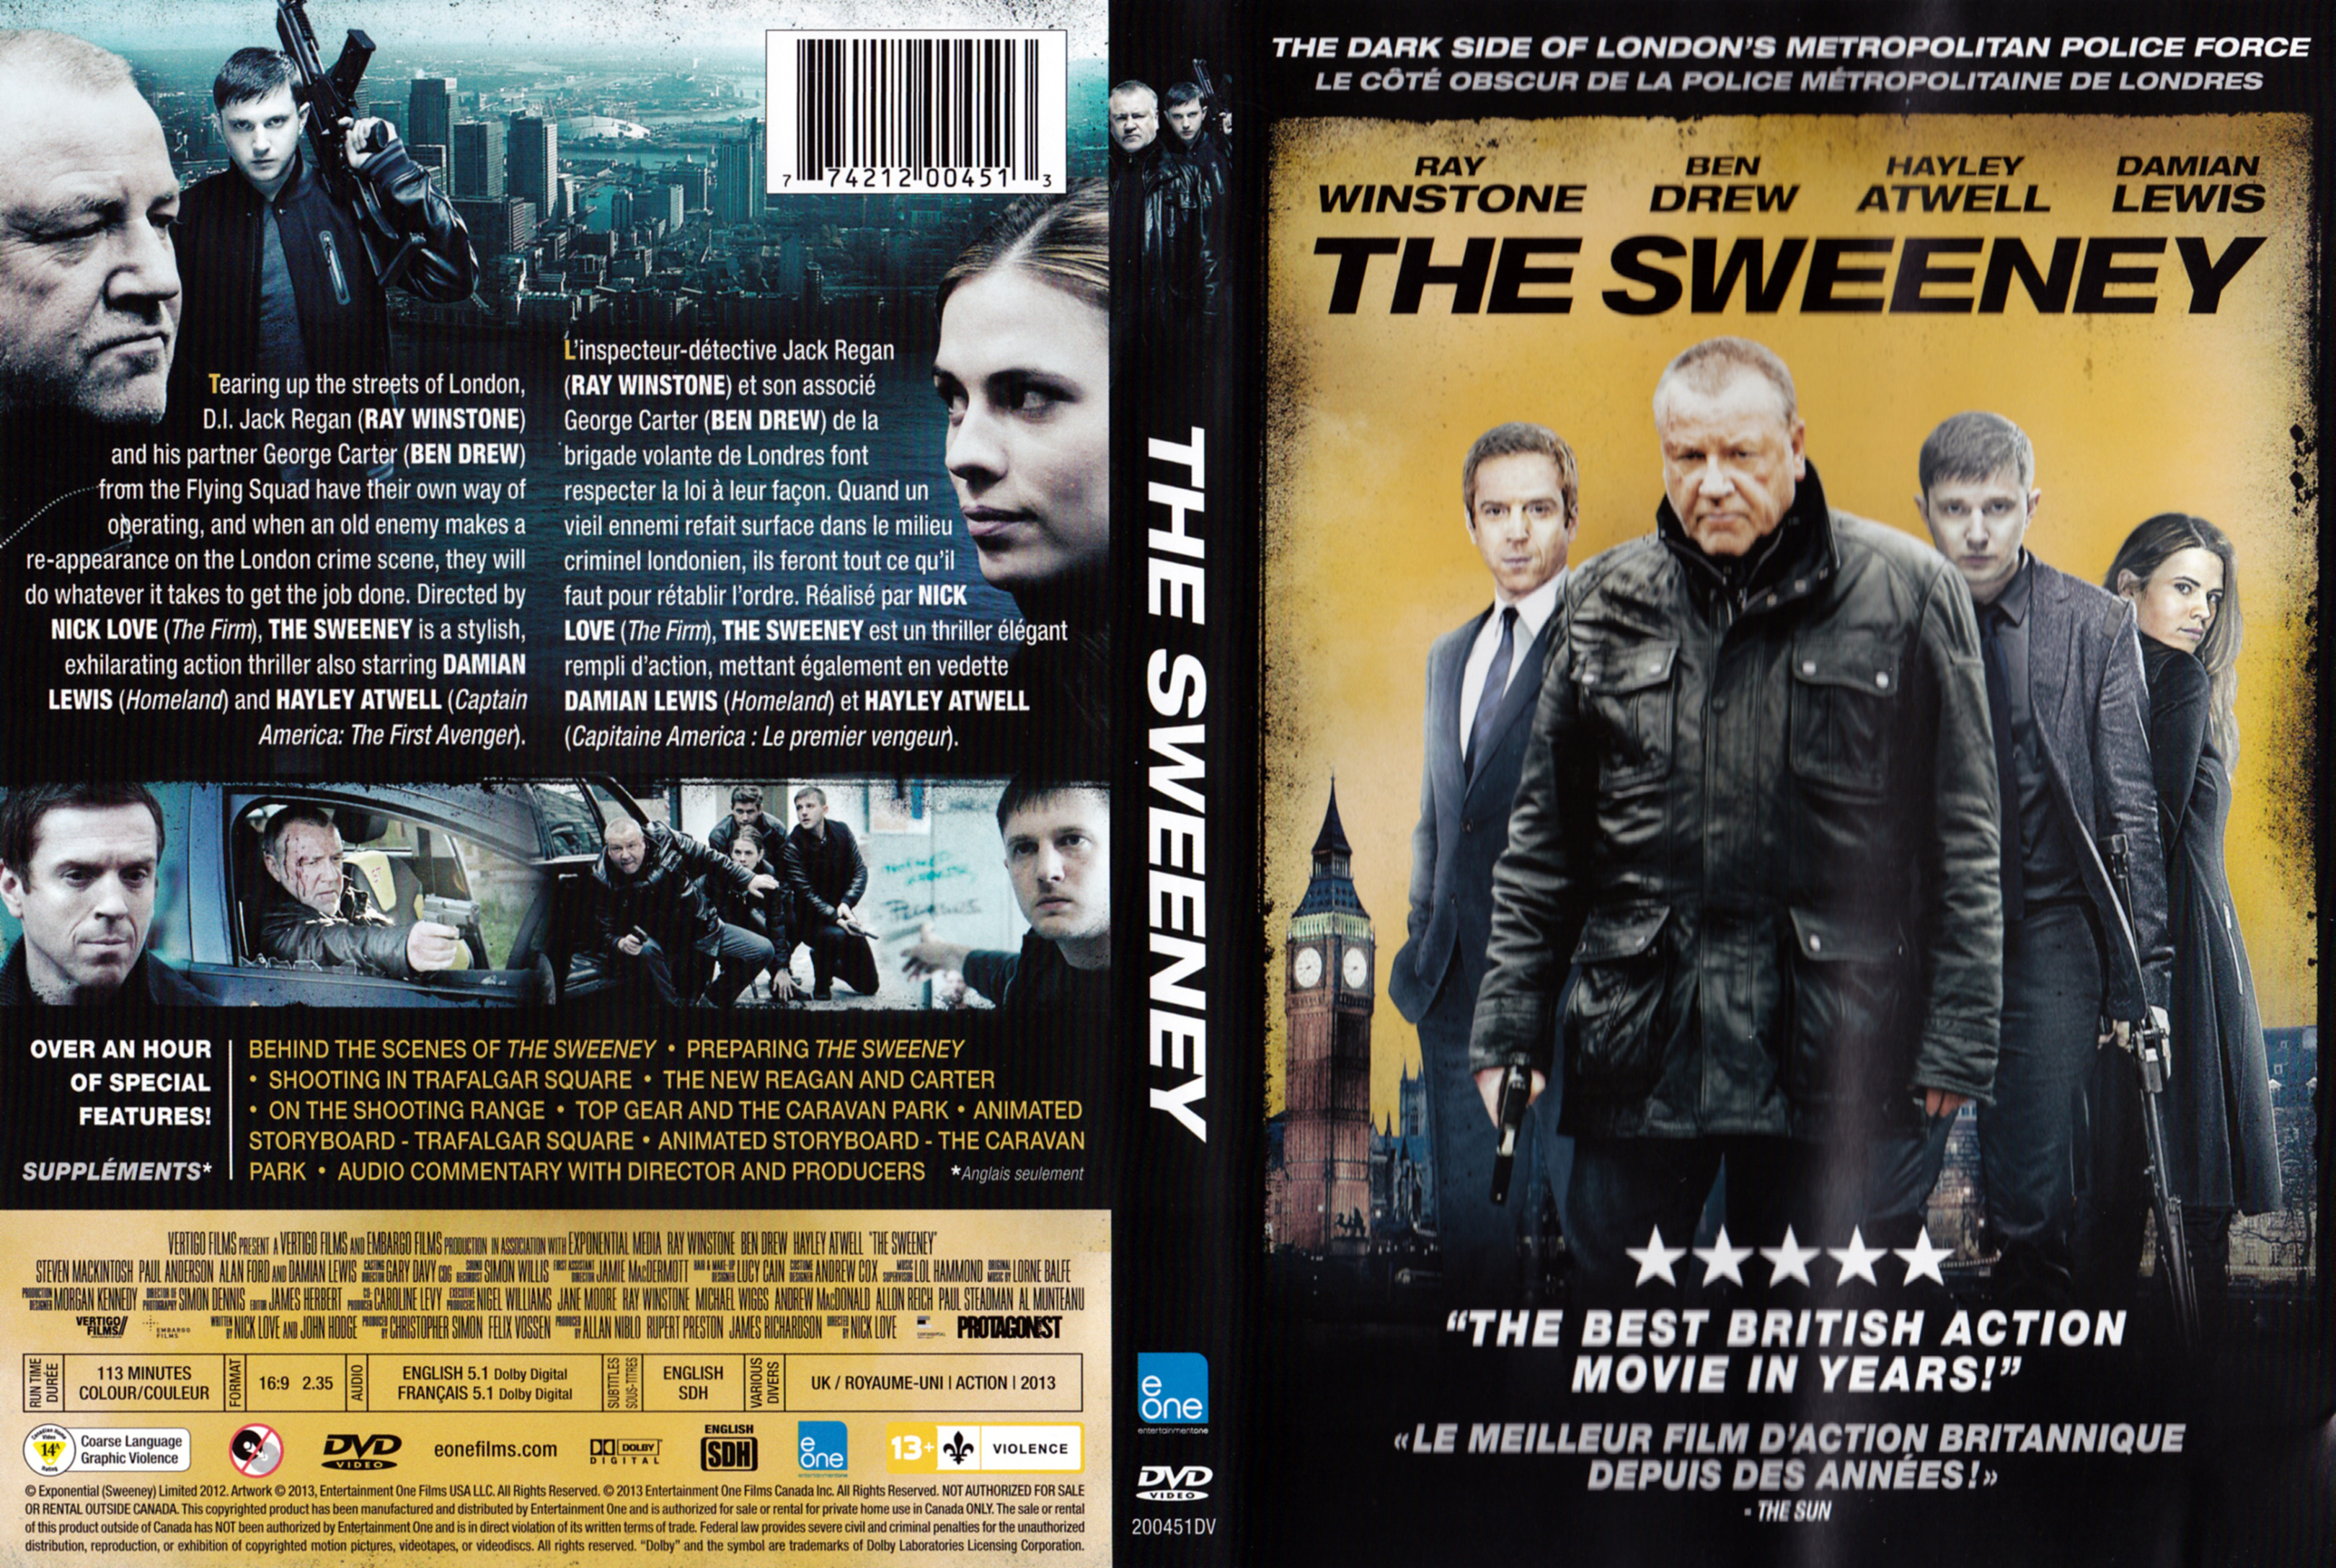 Jaquette DVD The Sweeney (Canadienne)